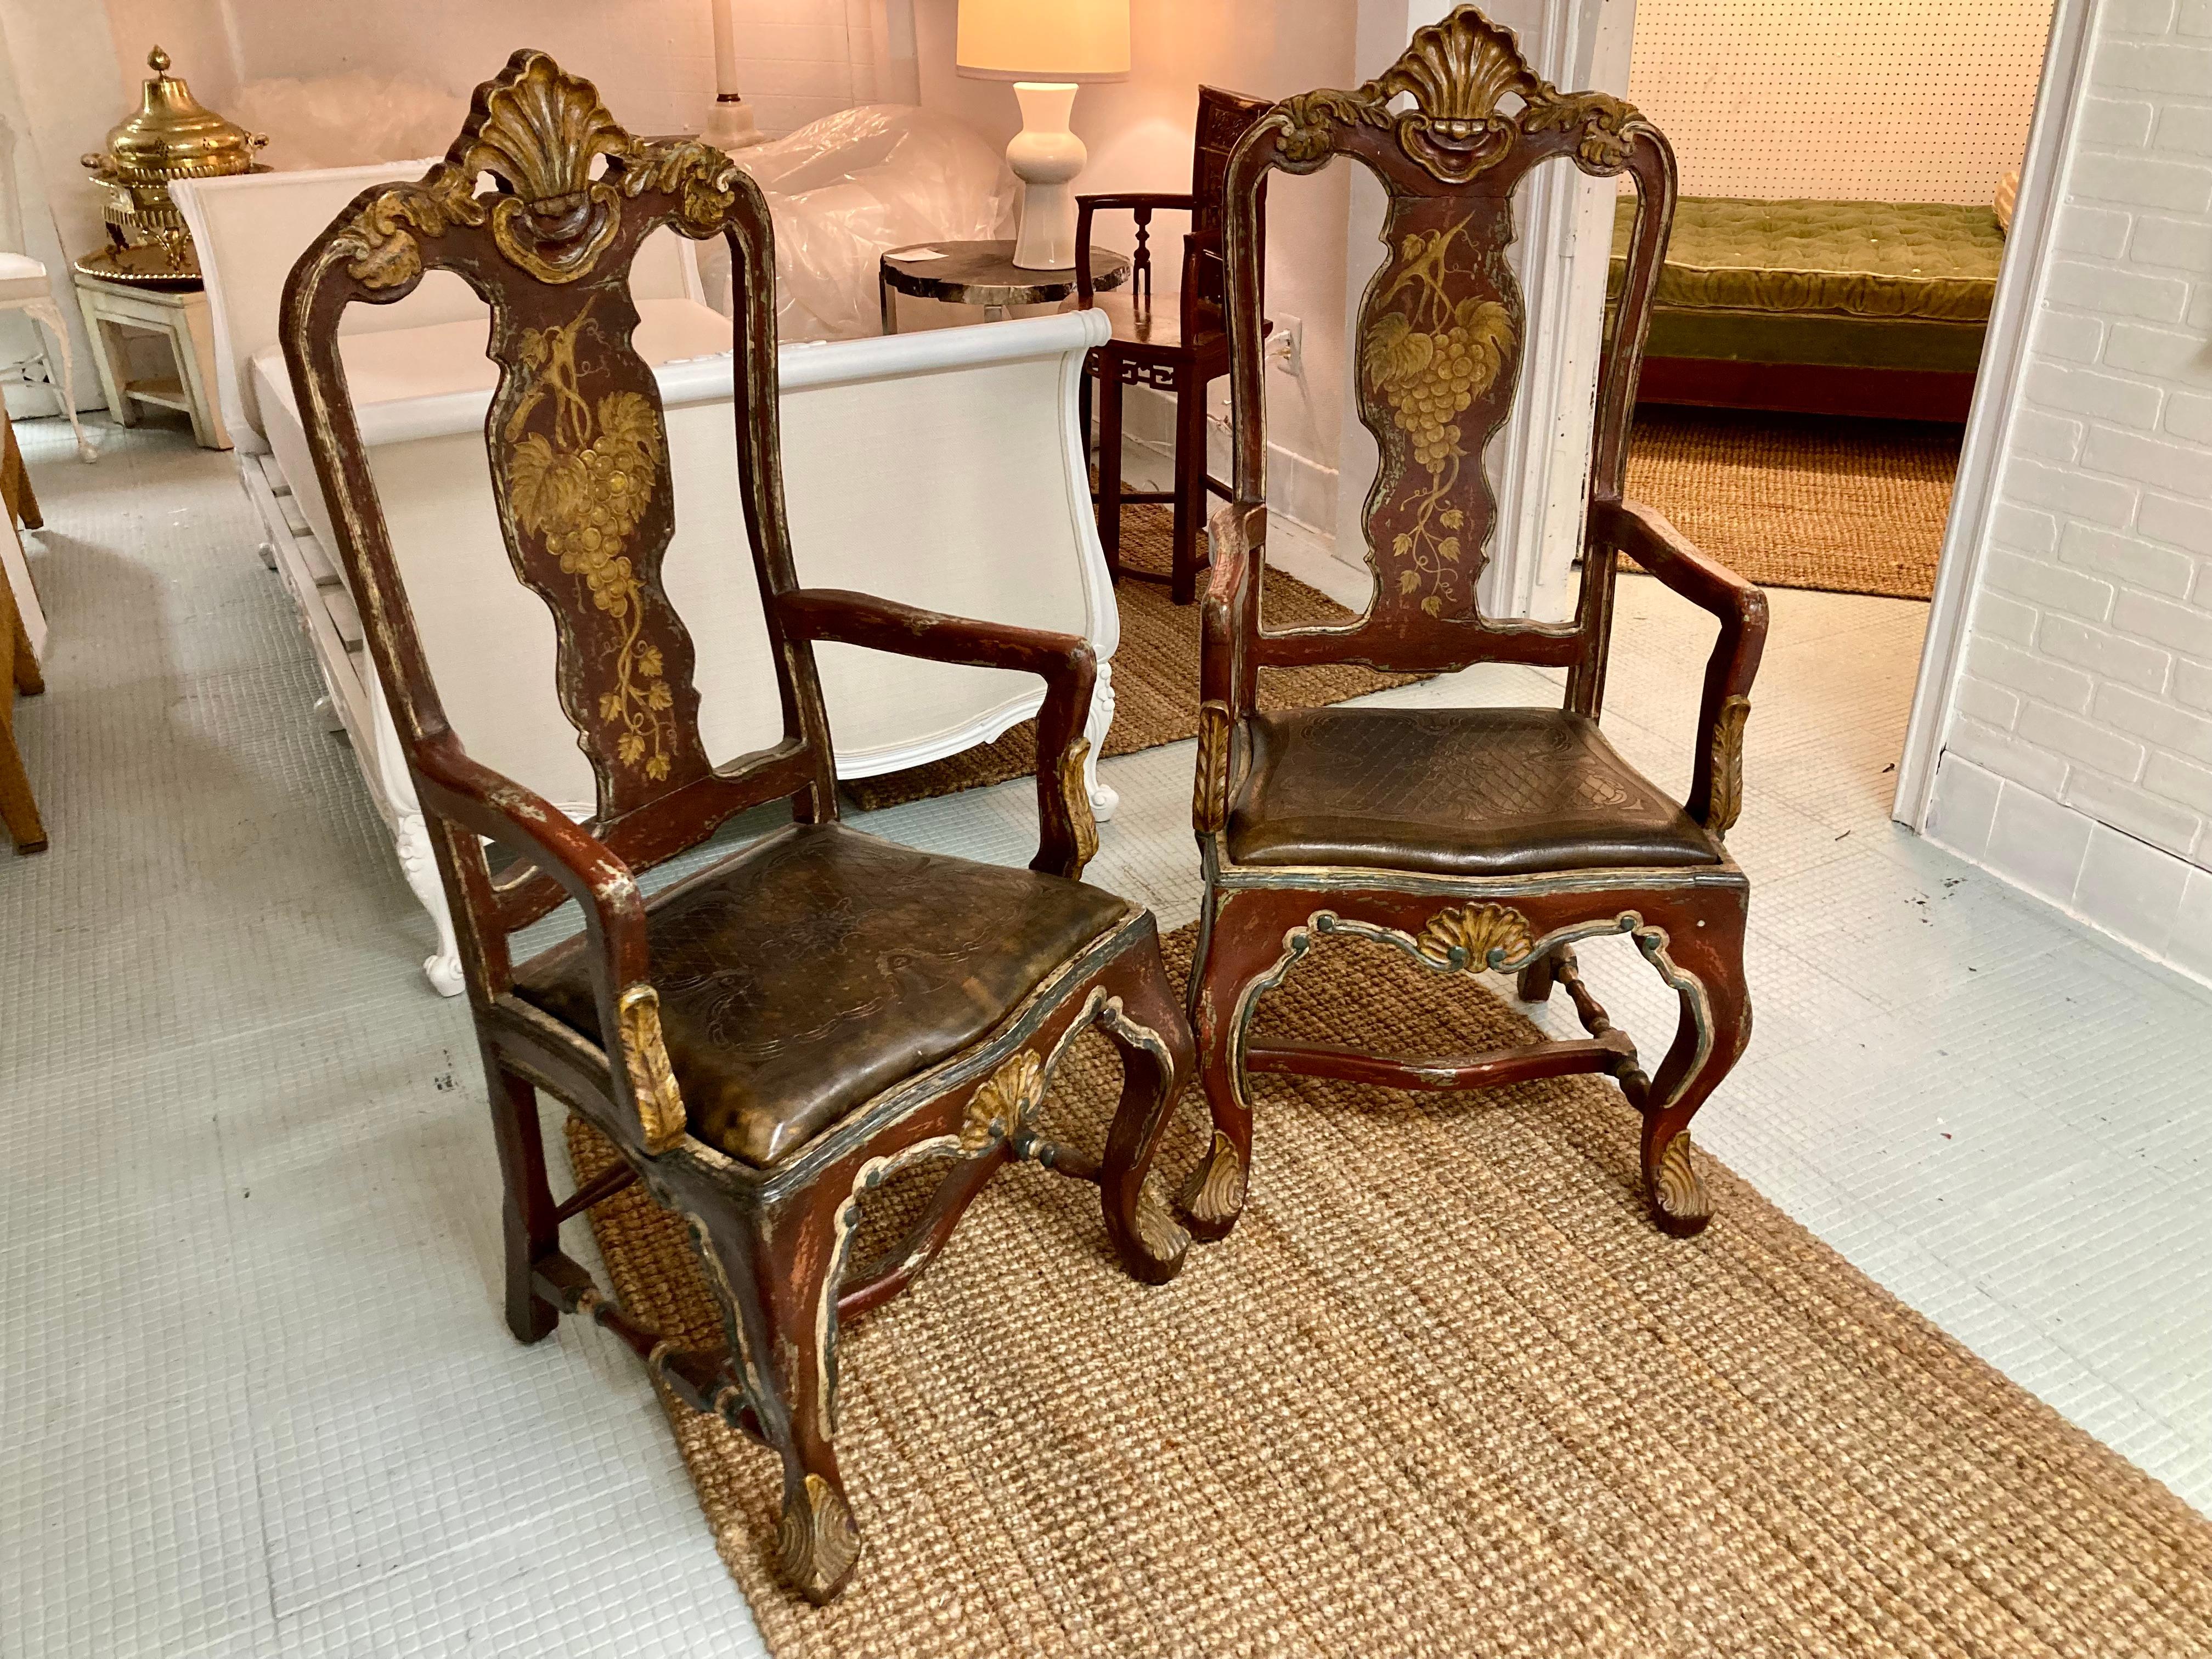 Beautiful pair of Venetian arm chairs with original painted finish and original embossed leather seats. Fabulous detailed carving and original painted finish and decorate gold paintings on the inside and outside backs. Add some Continental style to